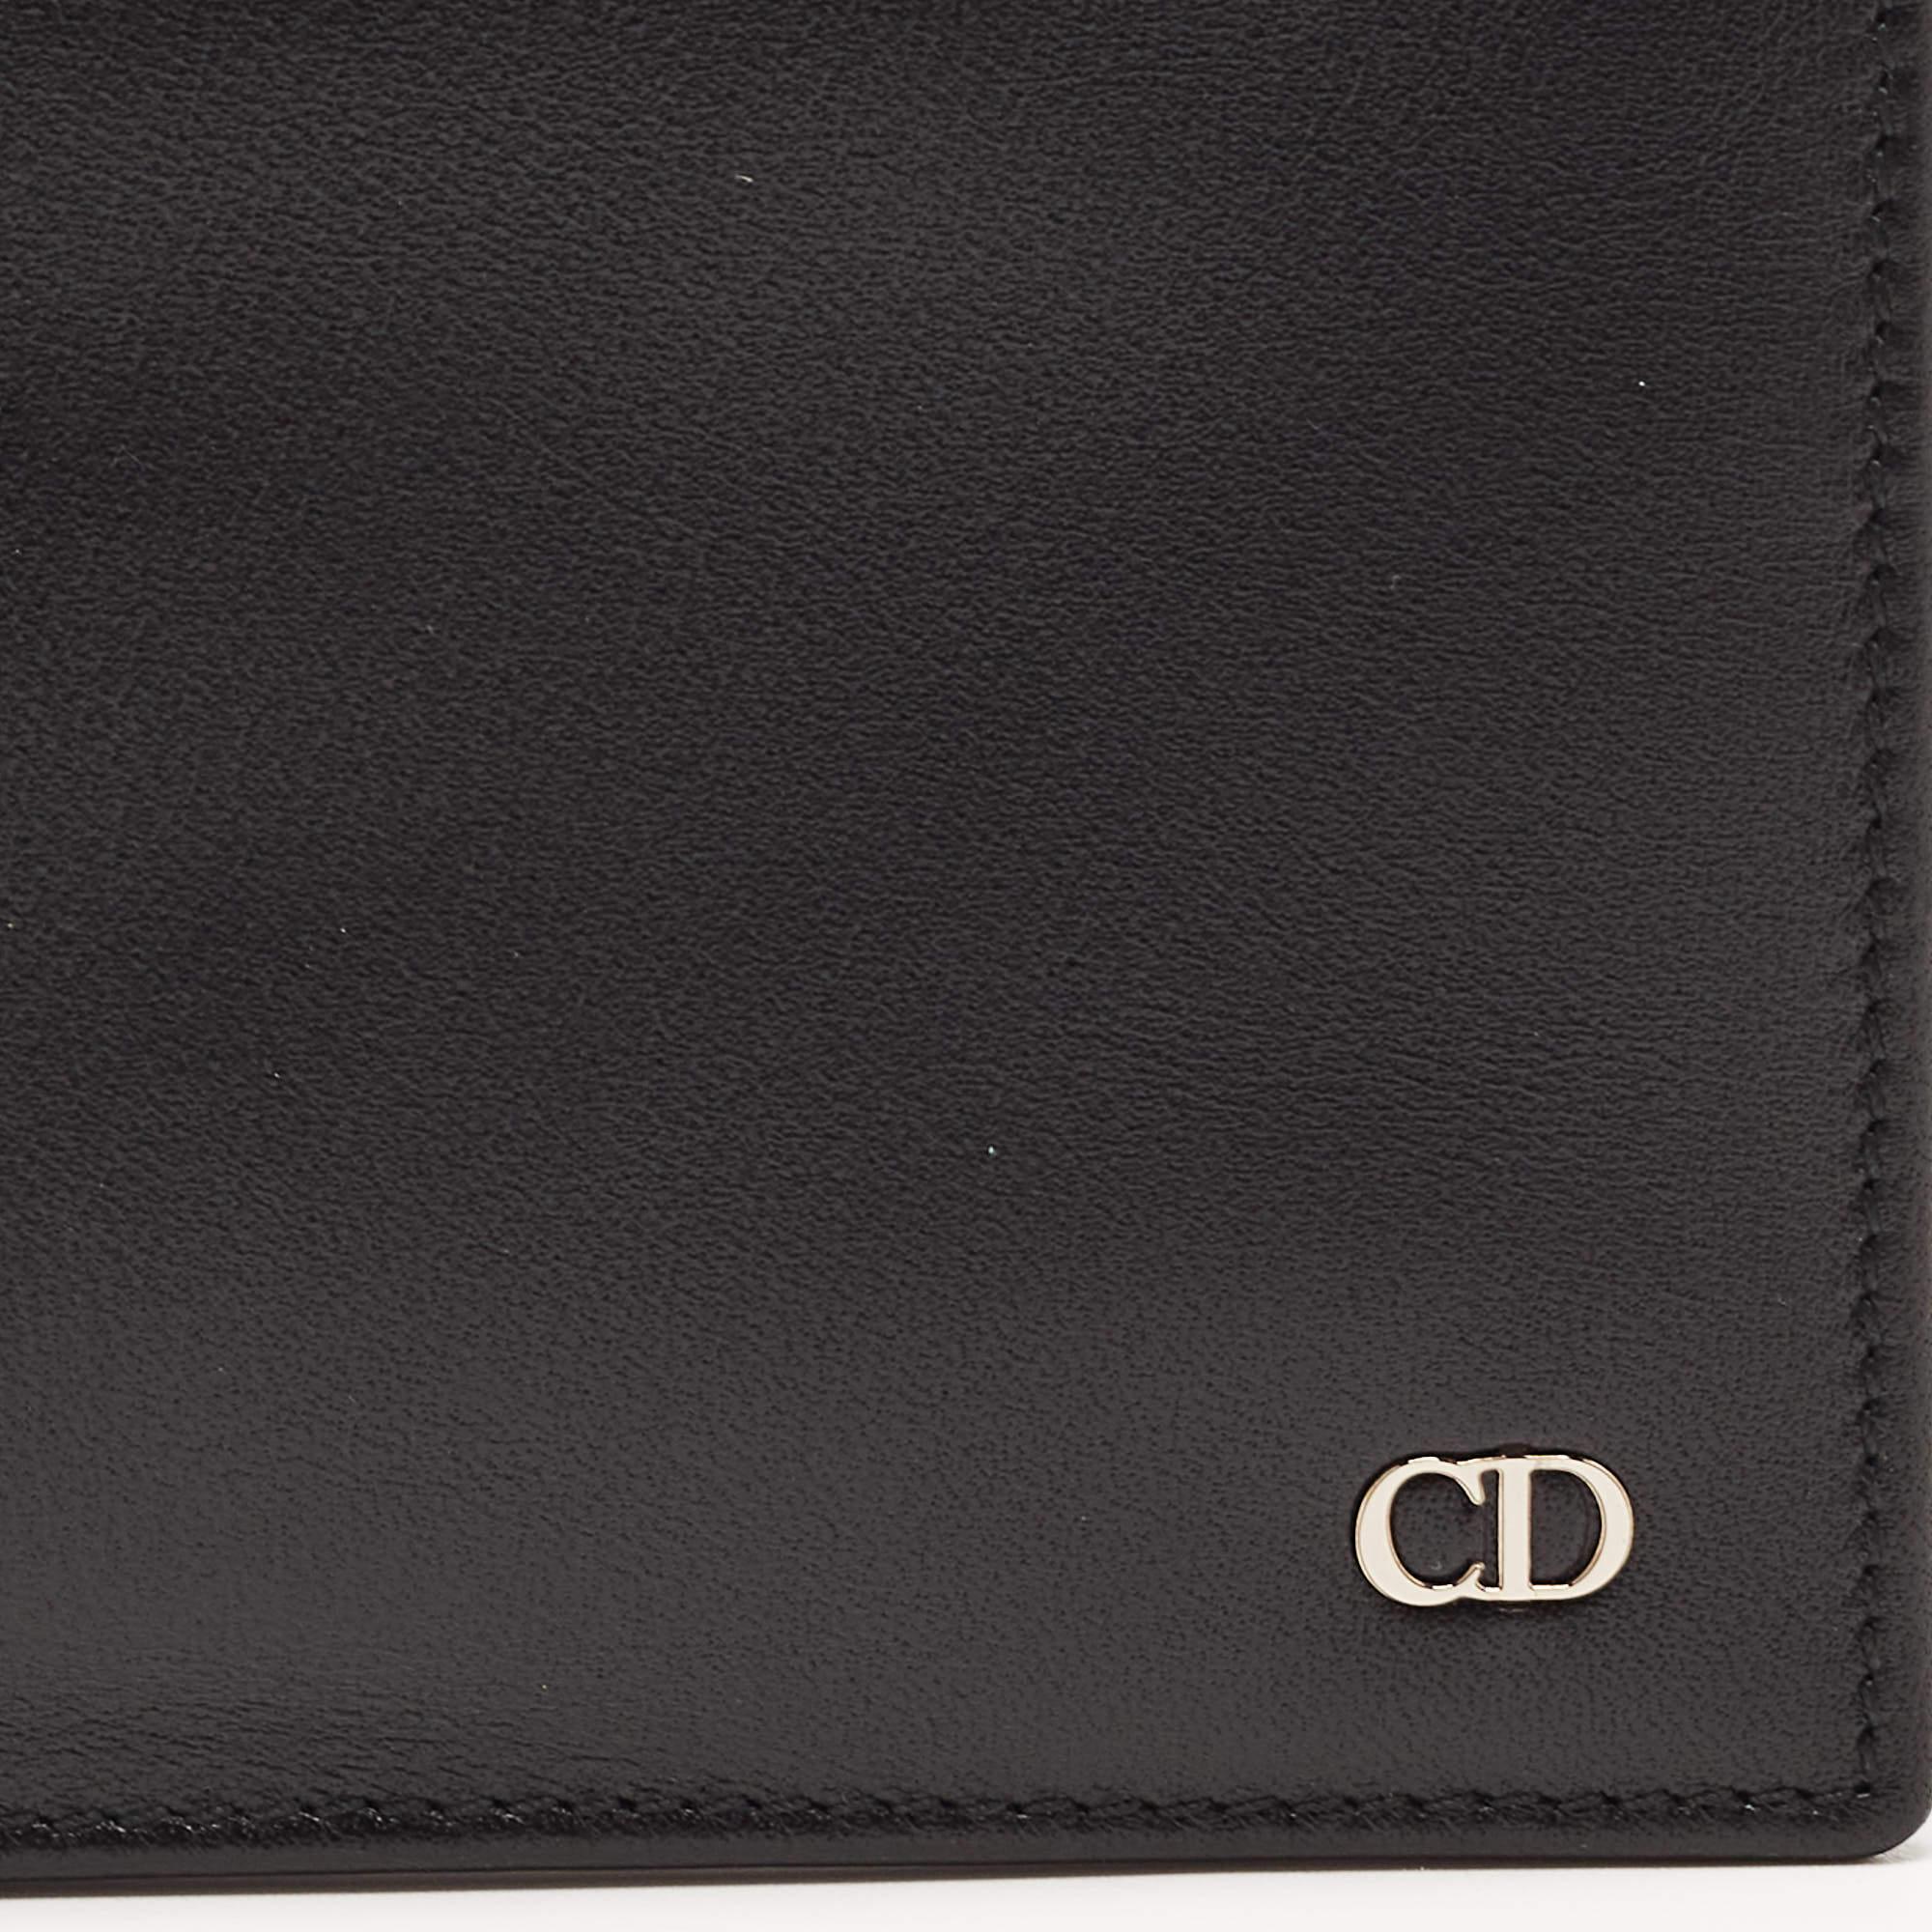 Dior Black Leather CD Icon Bifold Wallet 4